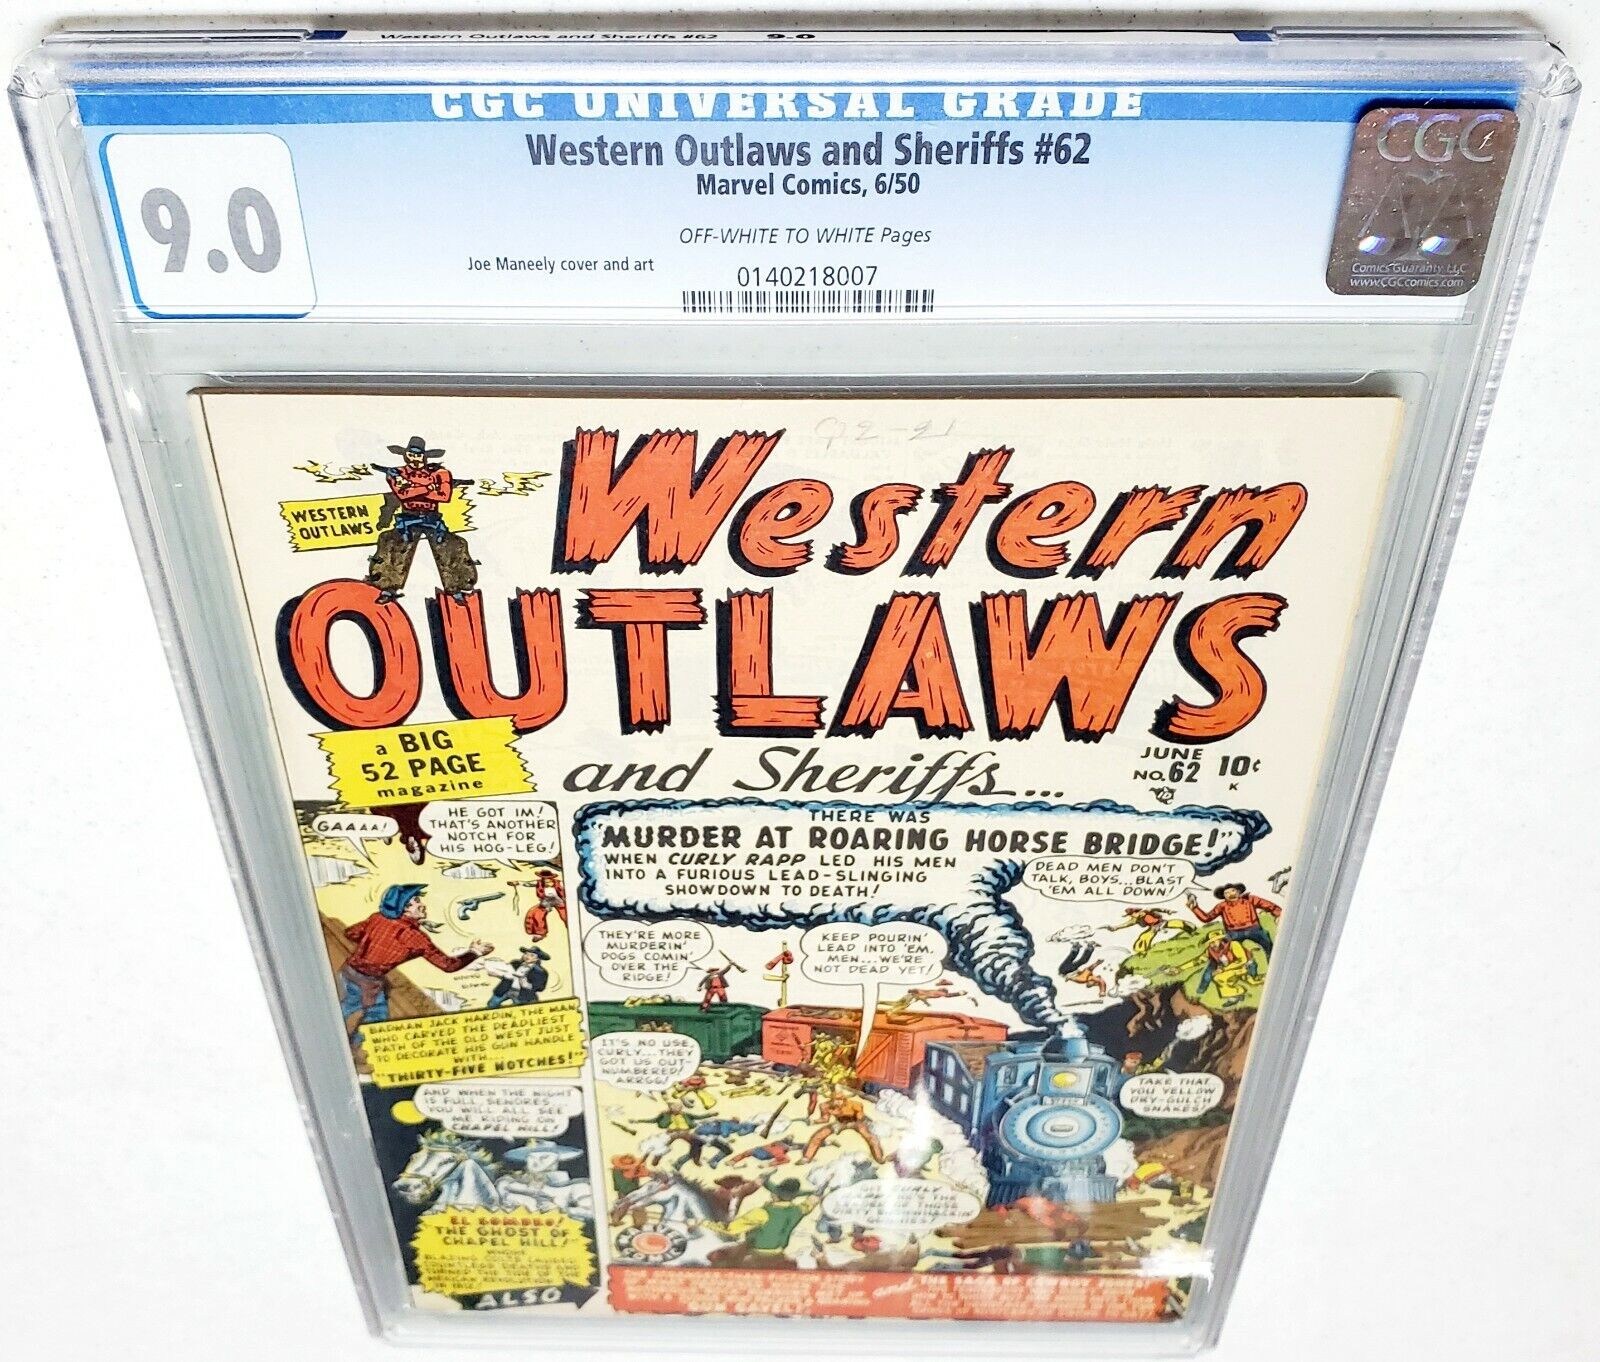 #1 CGC VFNM 9.0 Marvel Comics Western Outlaws #62 TOP Census 1st Ghost Rider